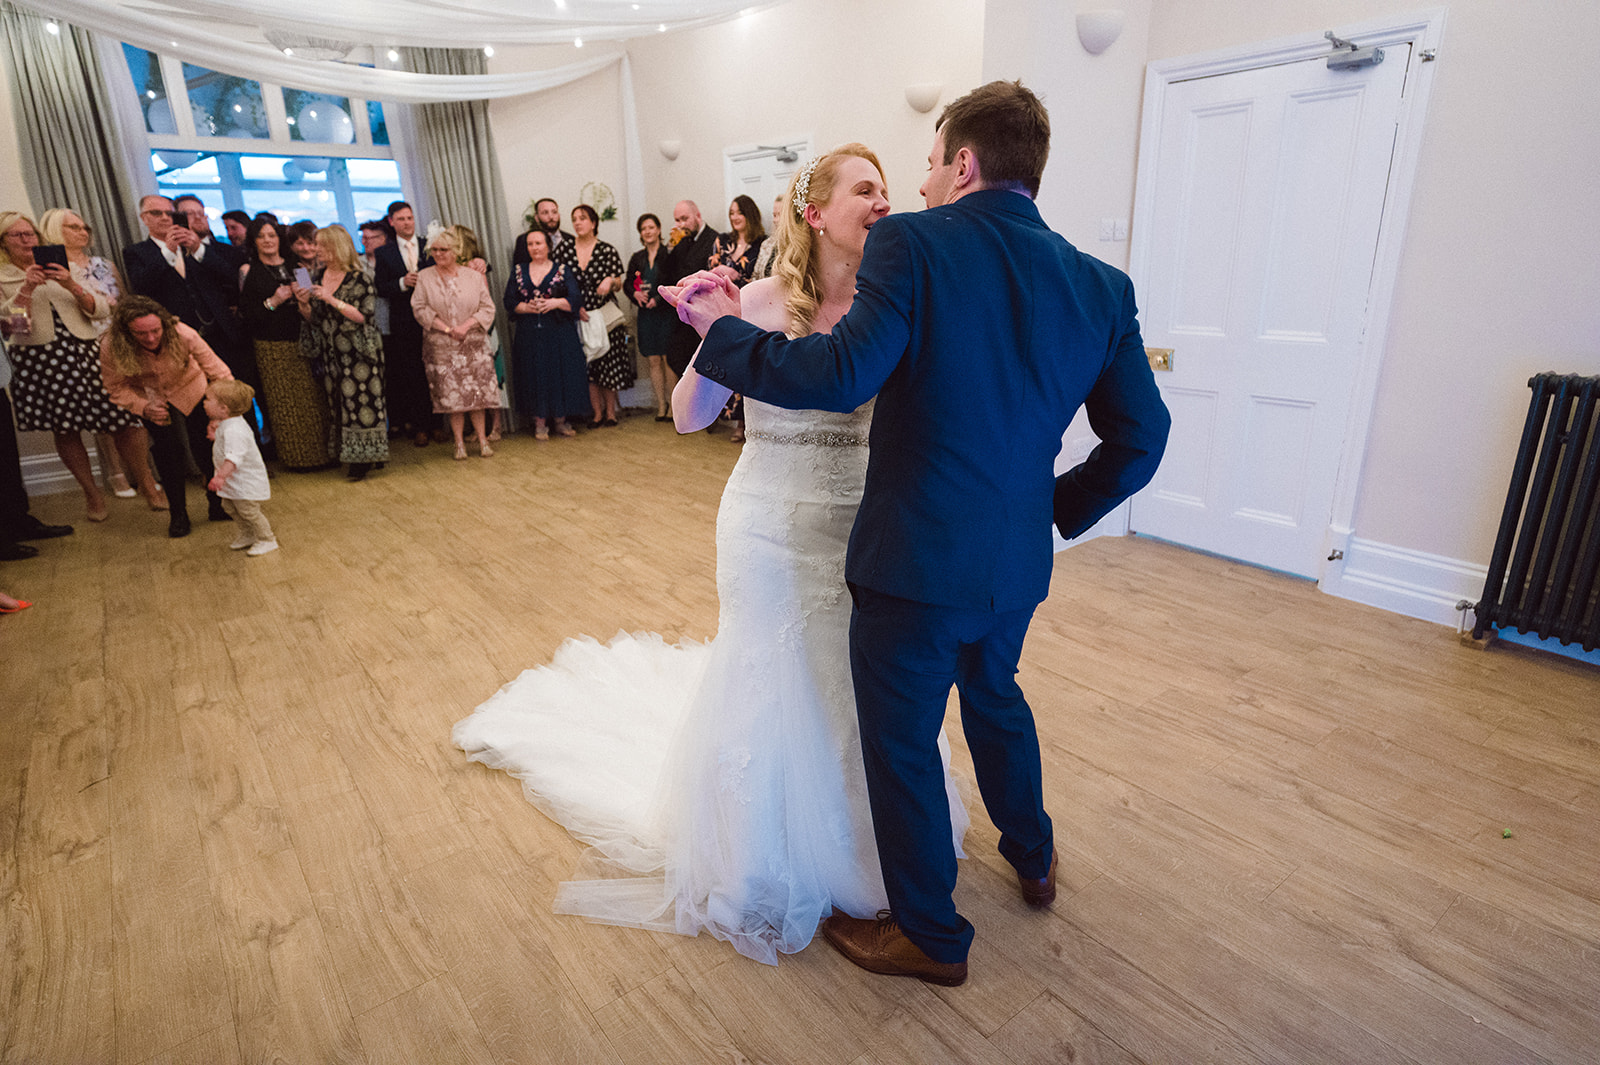 Memorable first dance as Lewis and Sarah celebrate their love at The Old Rectory, Berkshire.